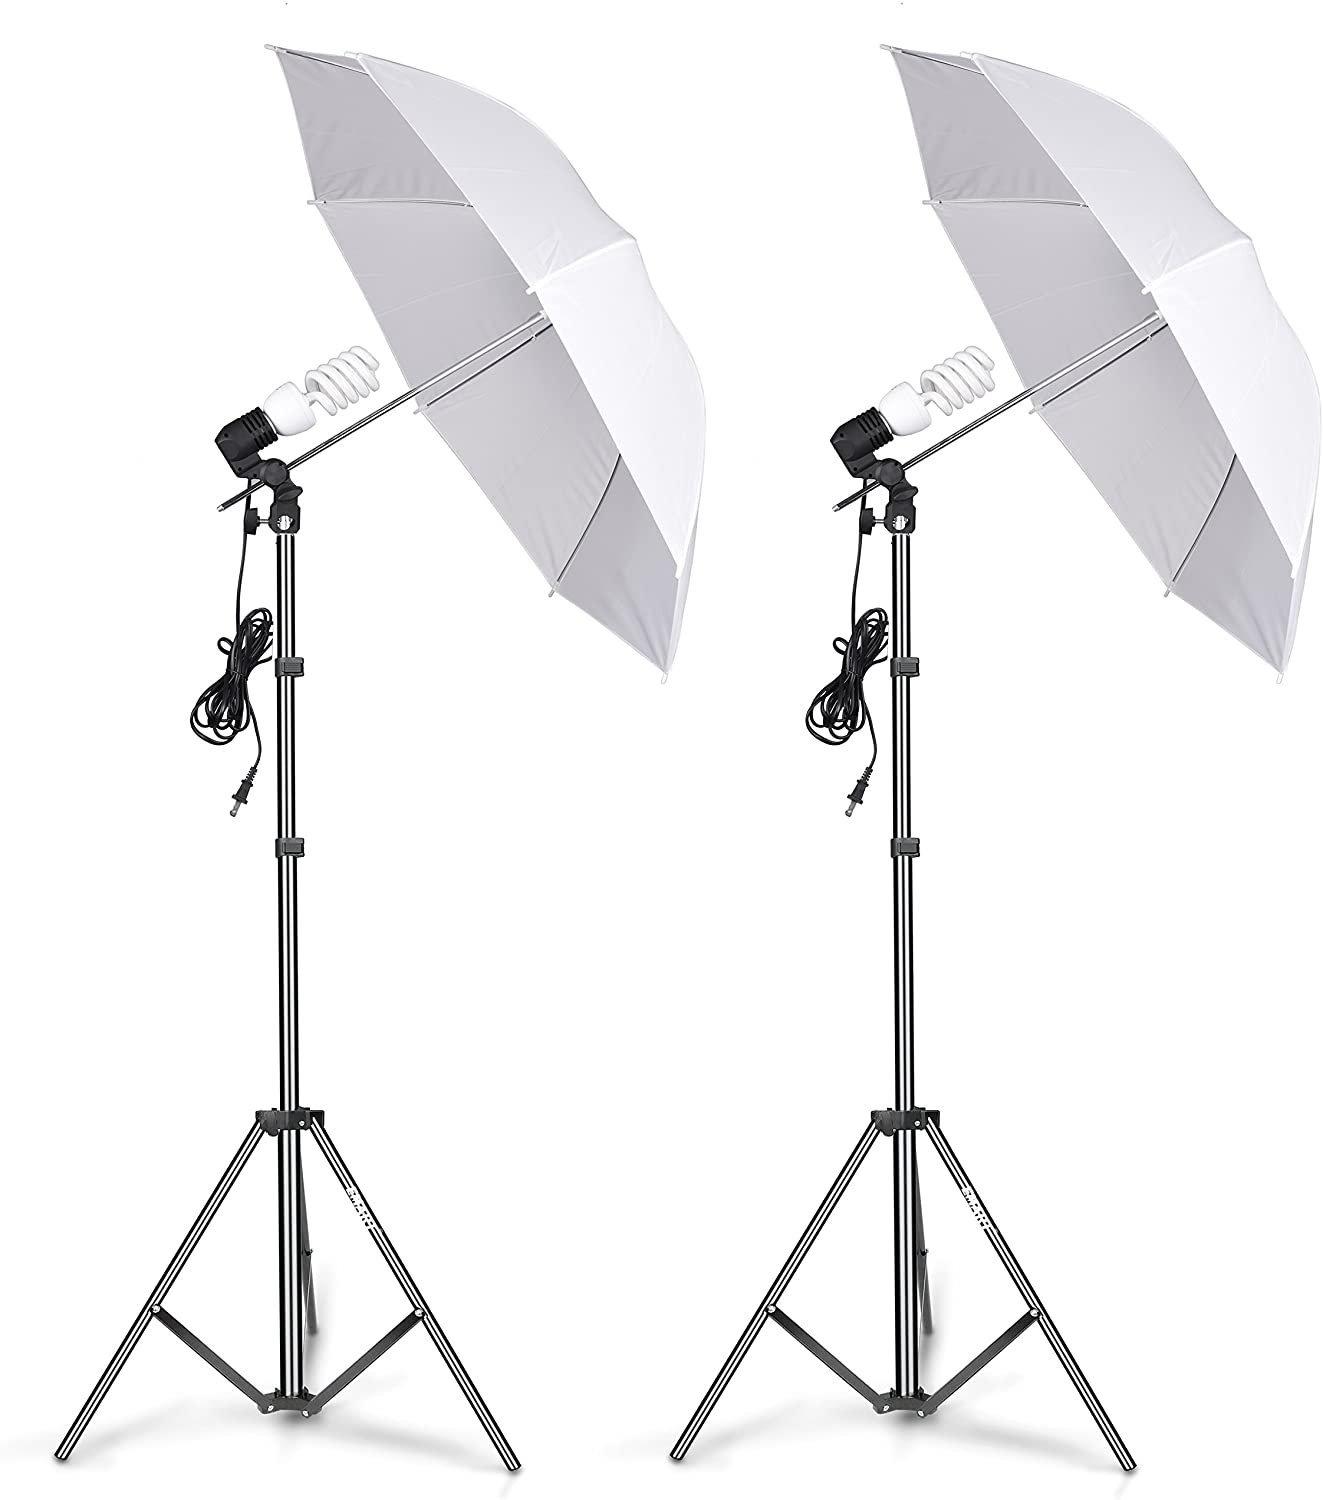 Photography Umbrella Lighting Kit, Continuous Reflector Lights for Camera Video Studio